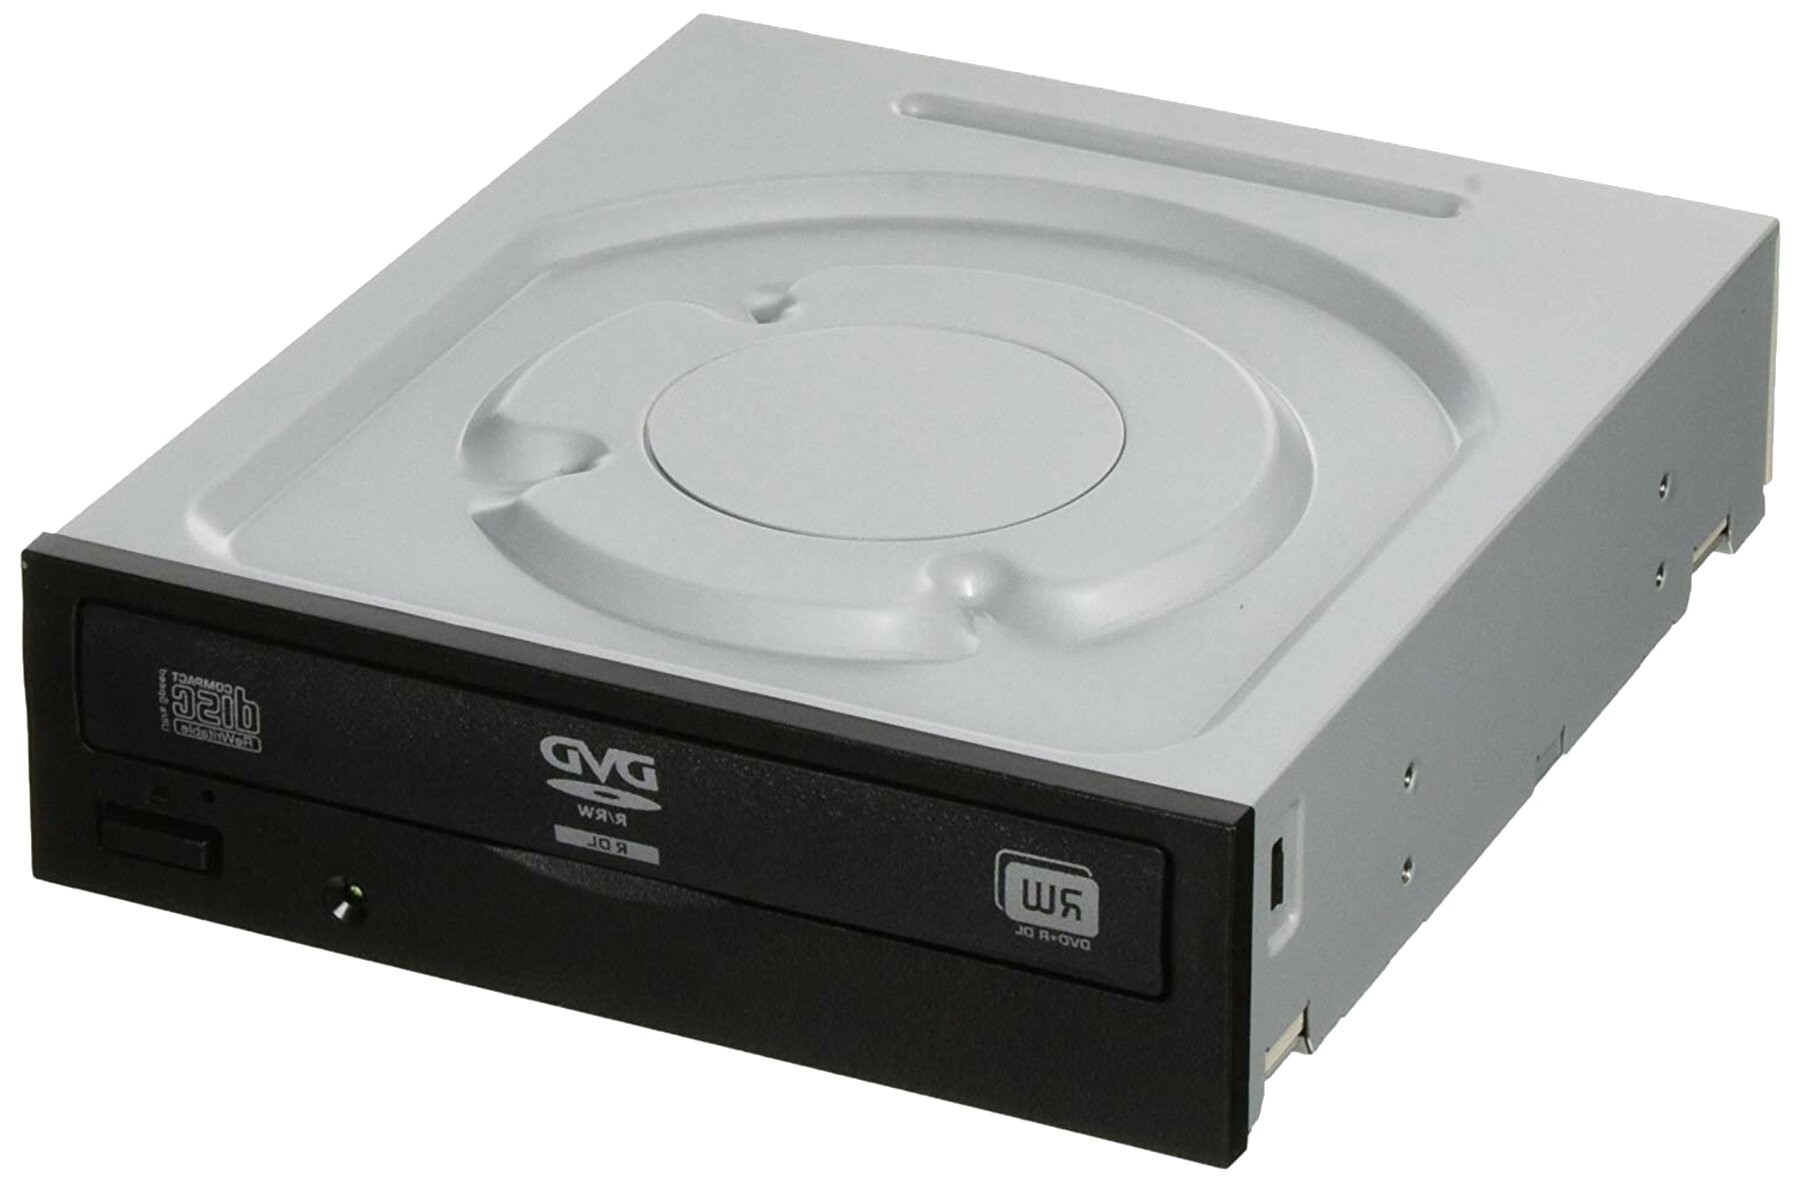 Dvd Rw Drive for sale in UK | 57 used Dvd Rw Drives